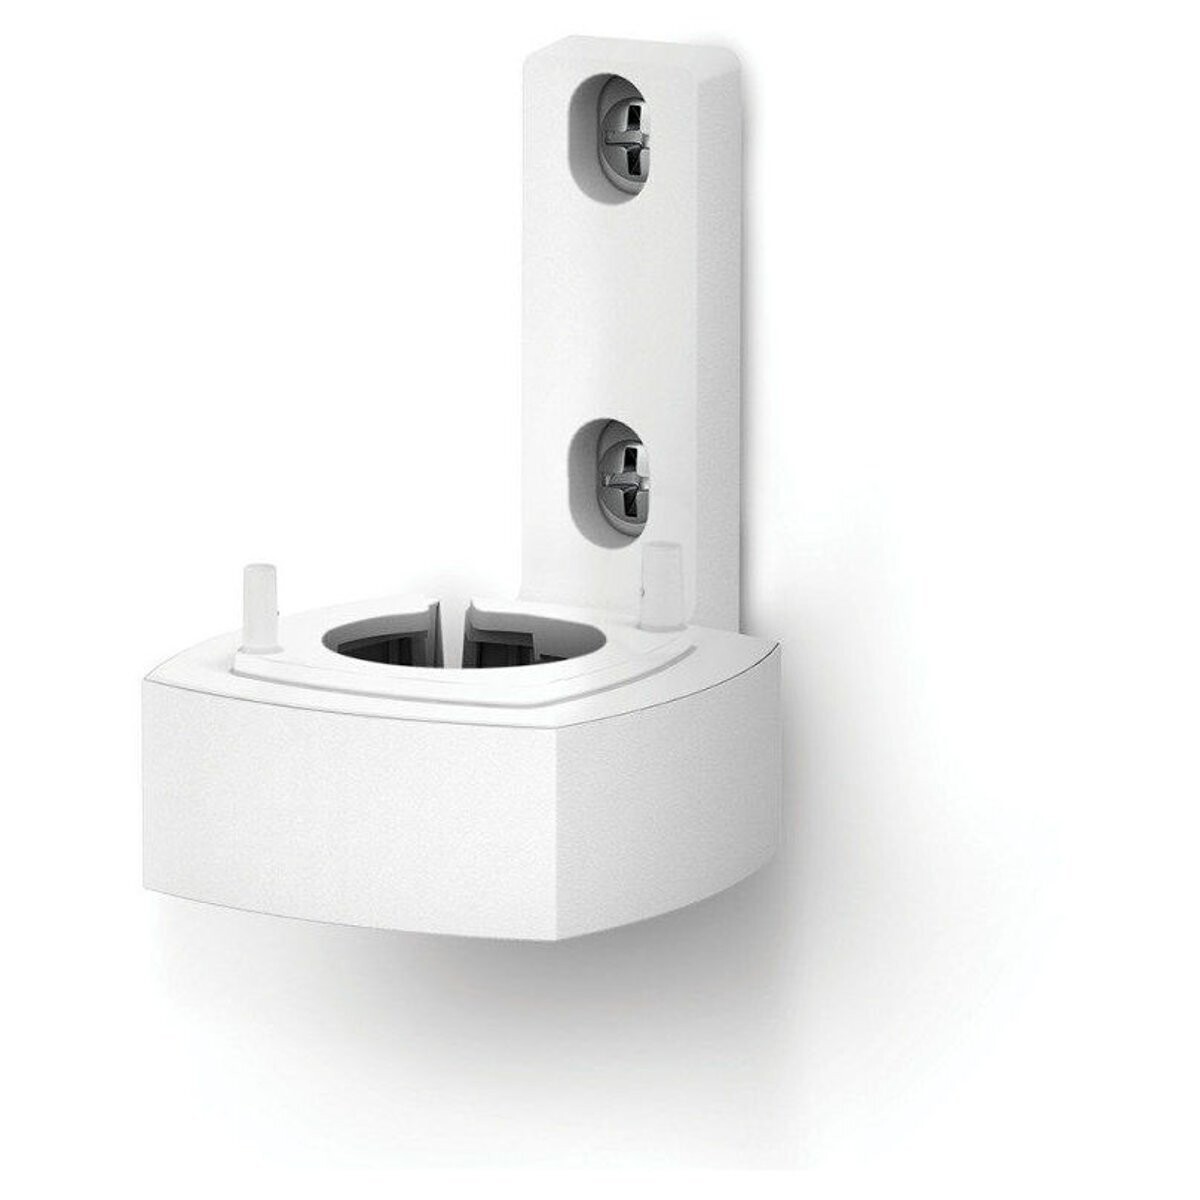 Linksys Velop Wall Mount, Color: White